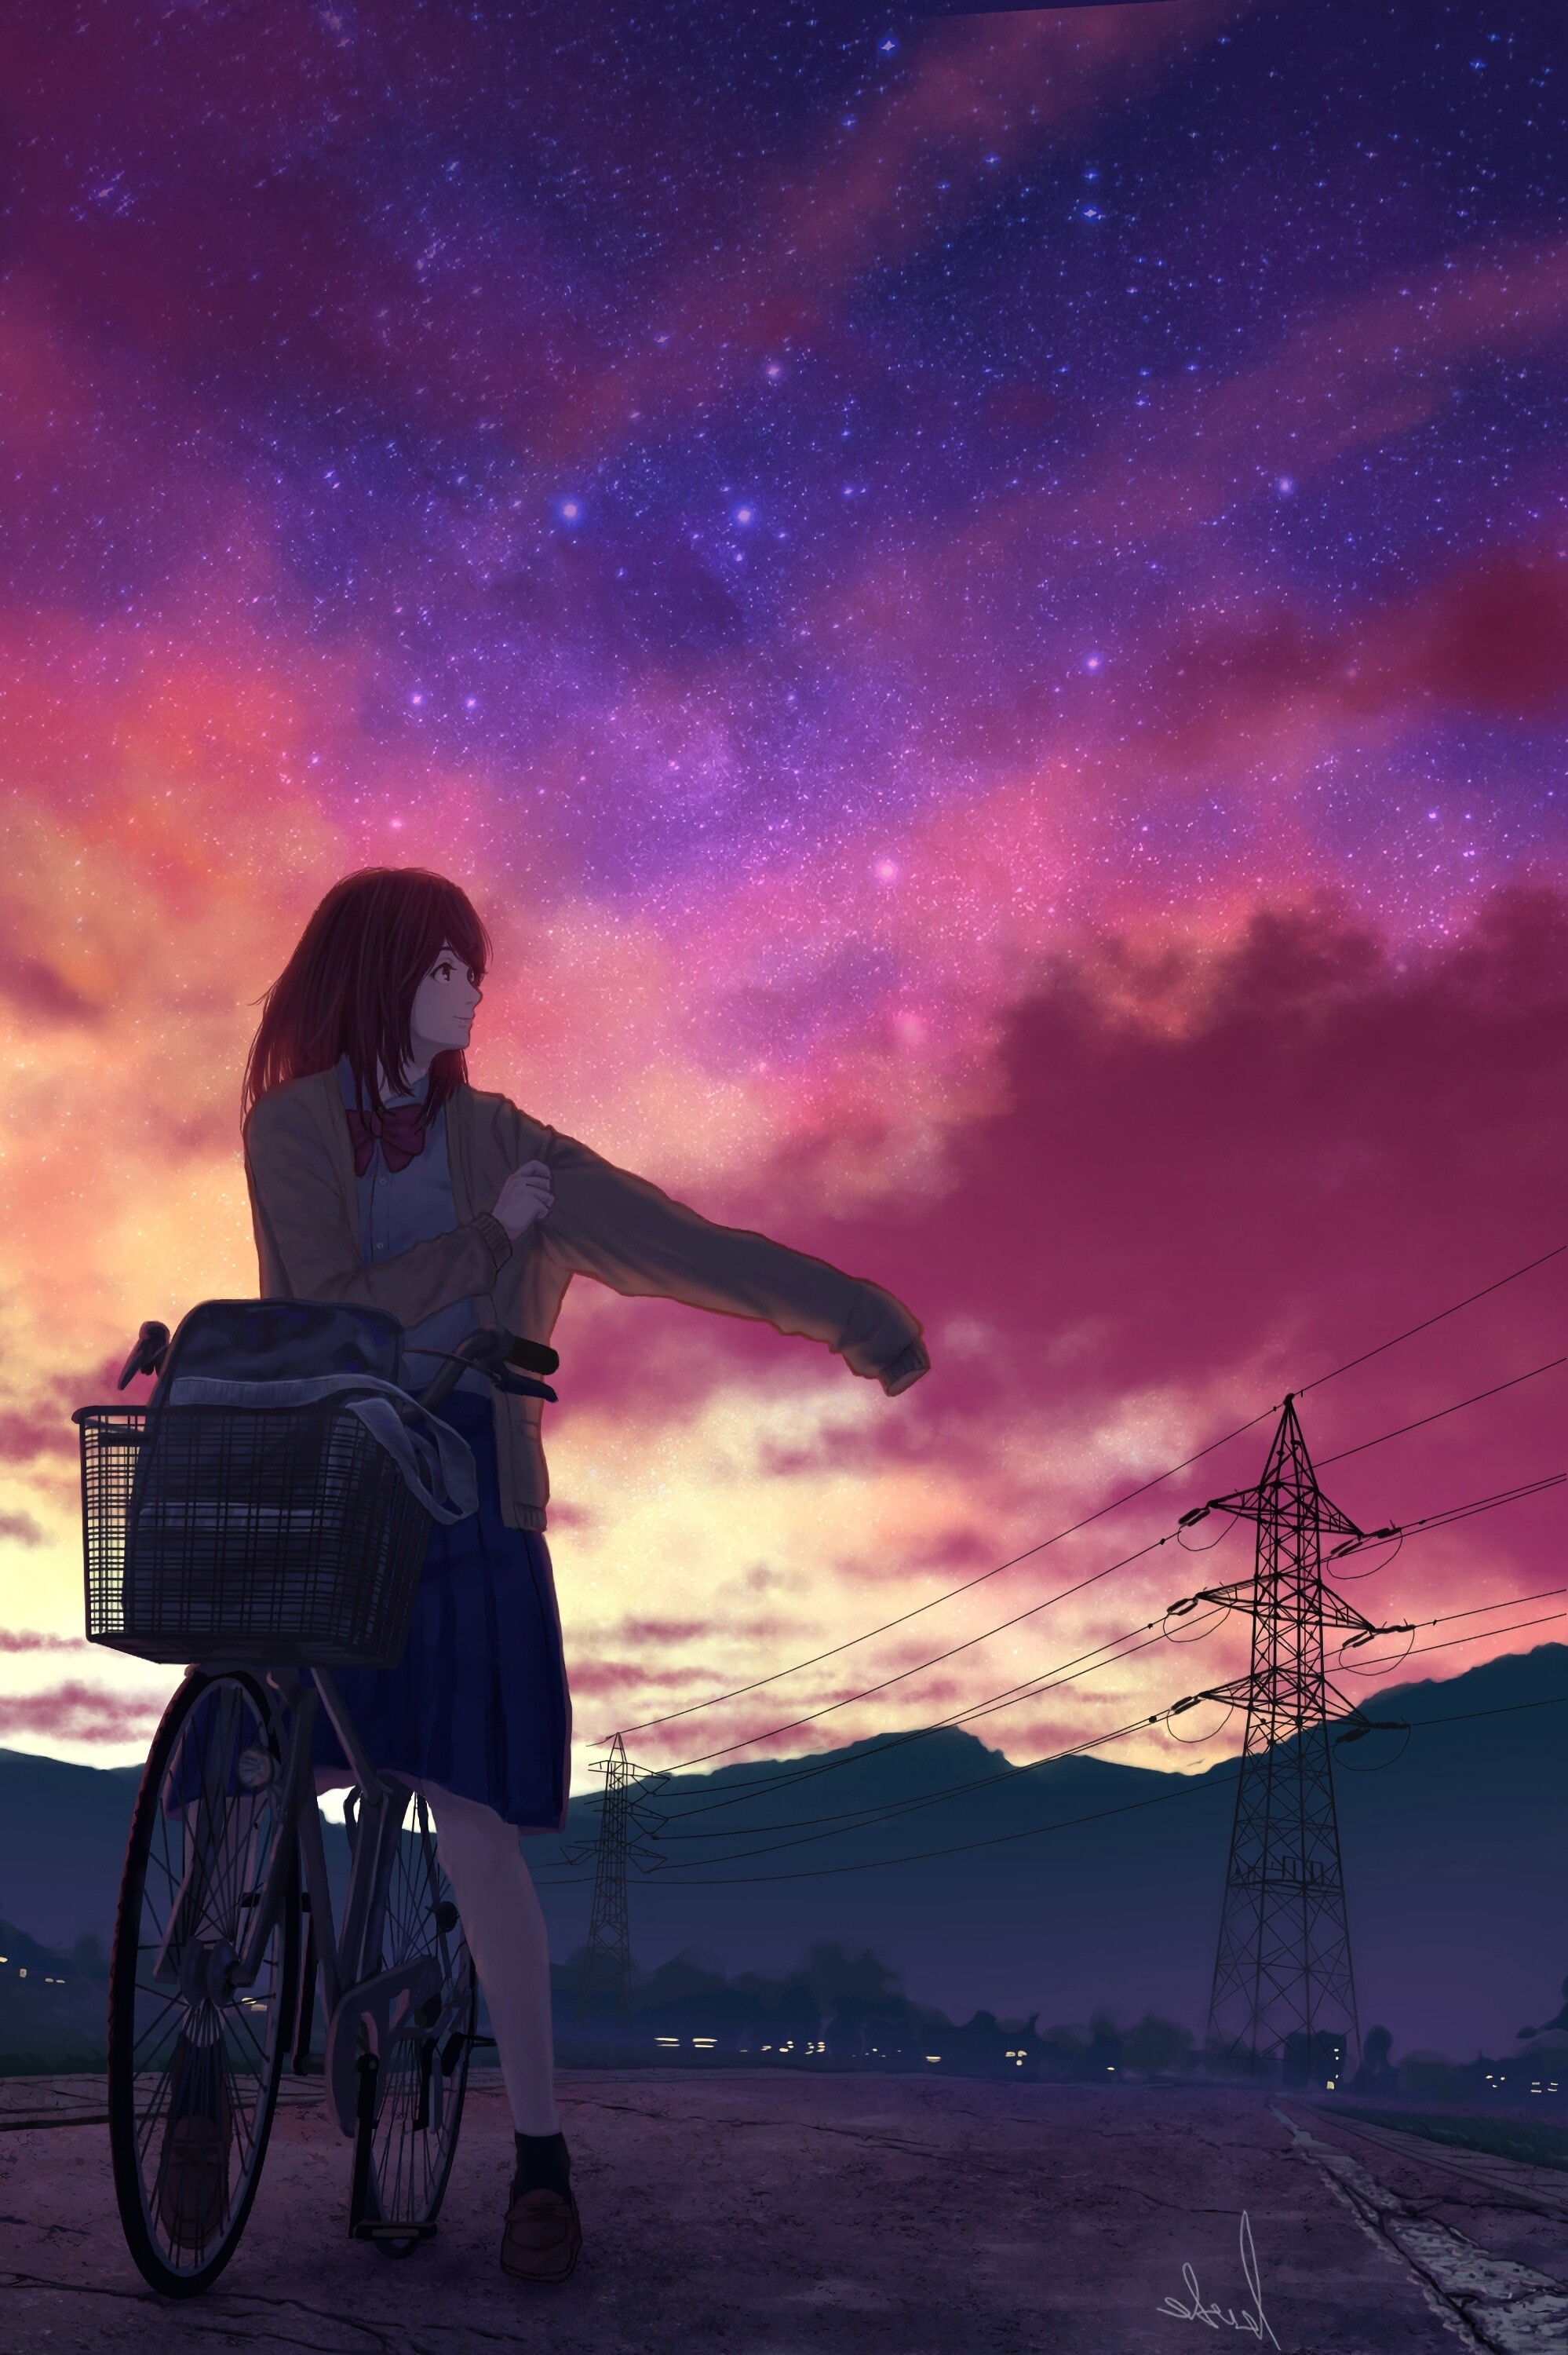 Girl and Bike: School Uniform, Sunset, Anime girl, Purple, A bicycle-mounted basket for carrying cargo. 2000x3000 HD Wallpaper.